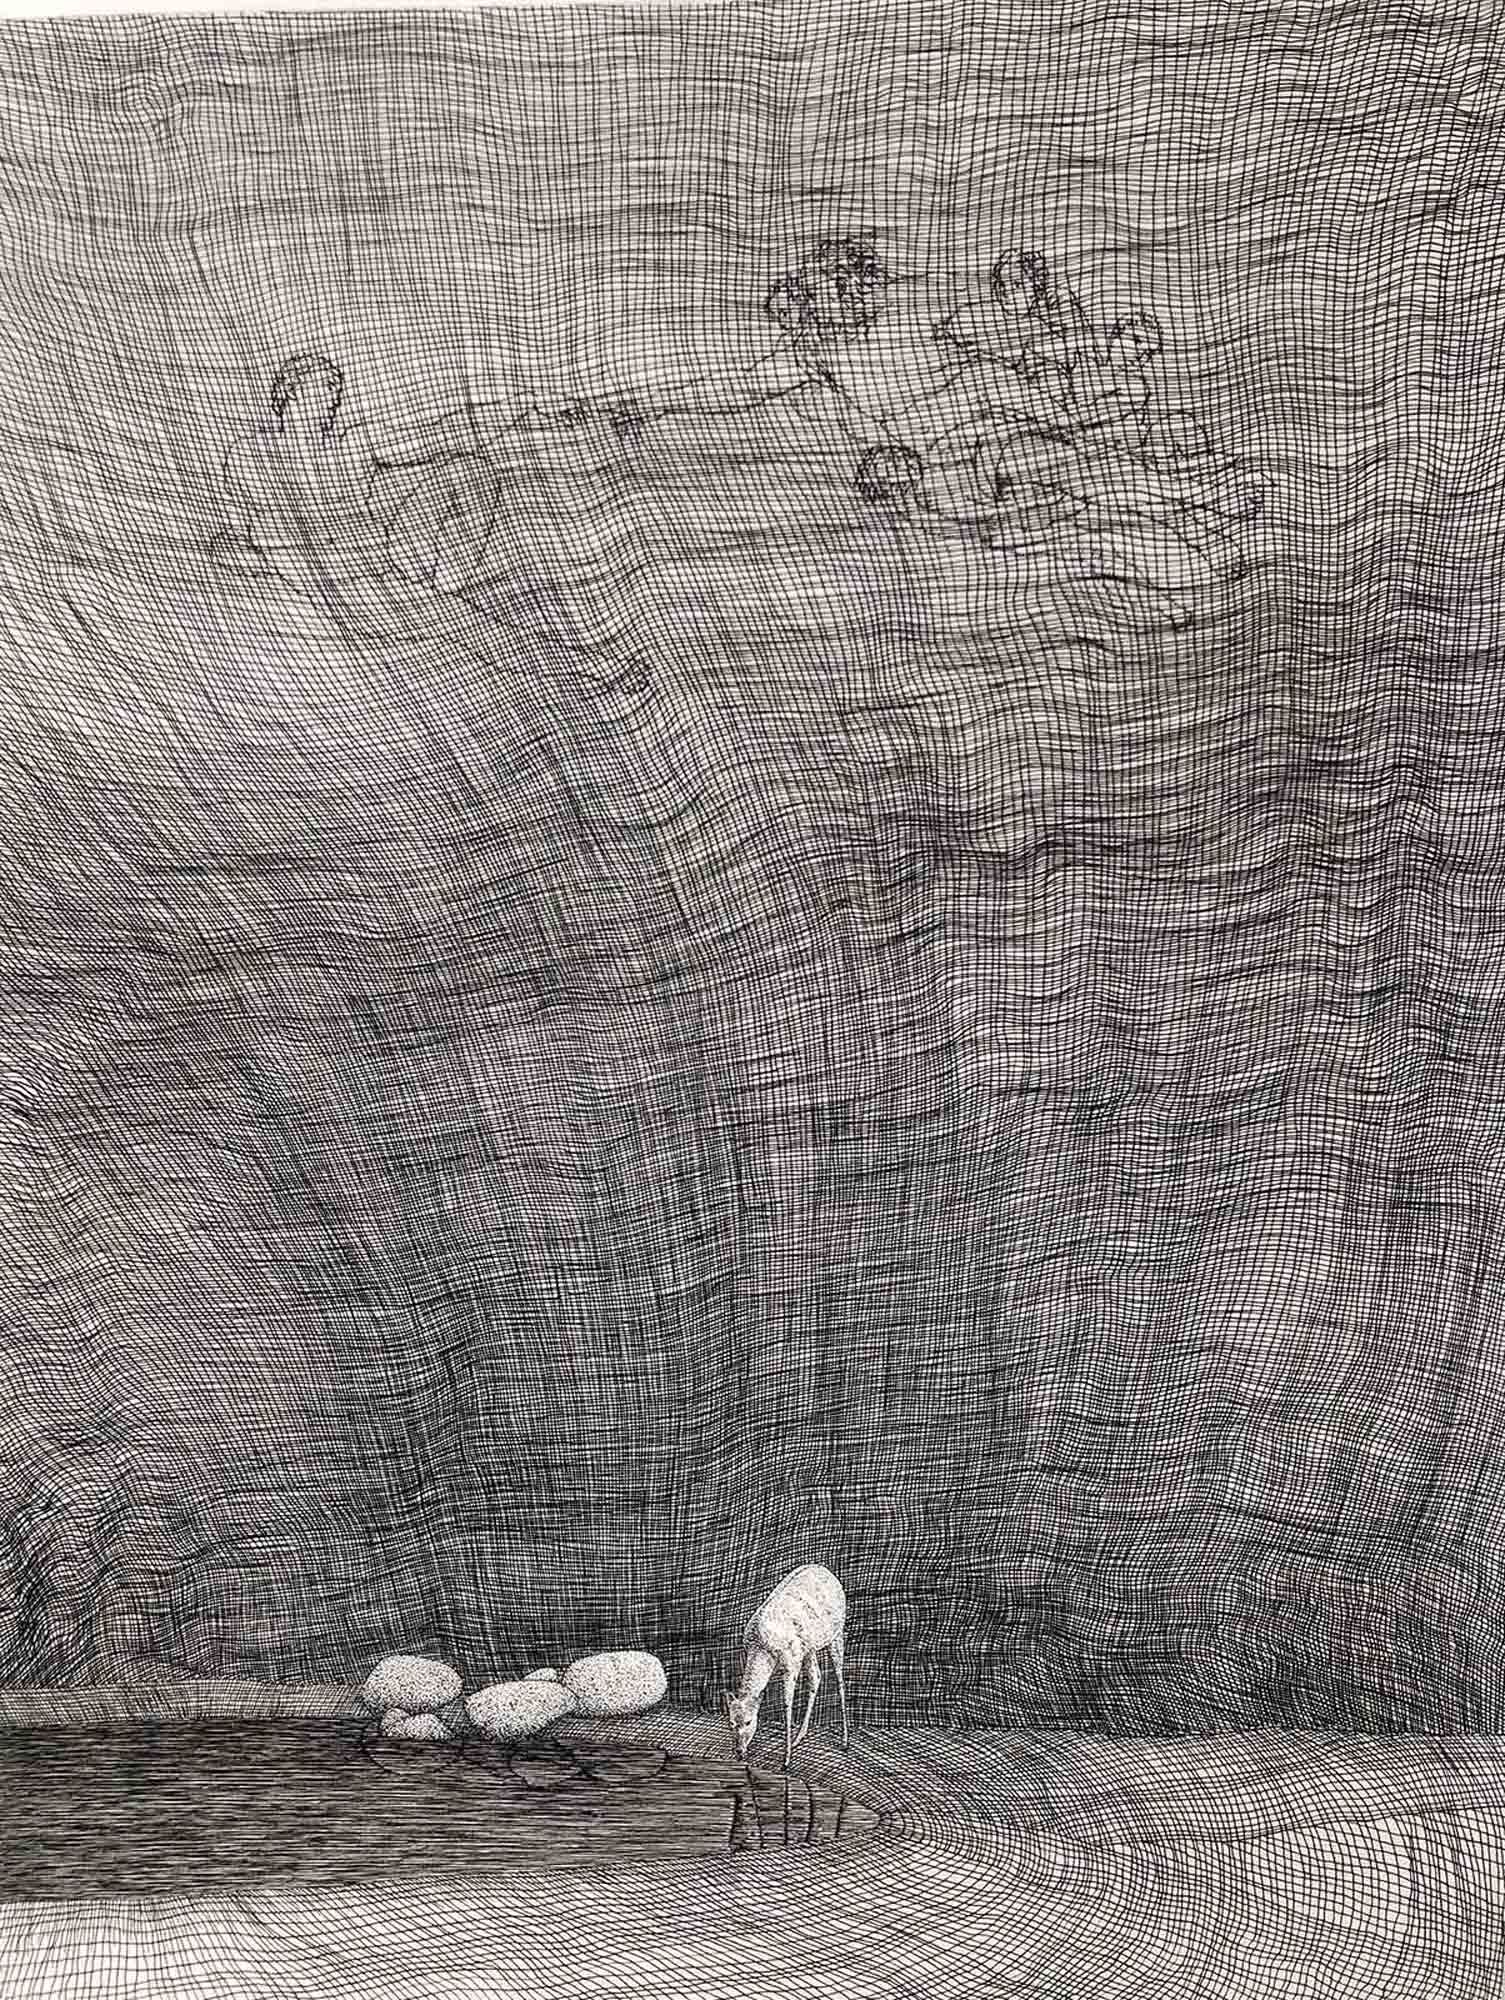 Mark Alexander's pen and ink art: Deer sips from cave pool, faint outline of 'Creation of Adam' above.